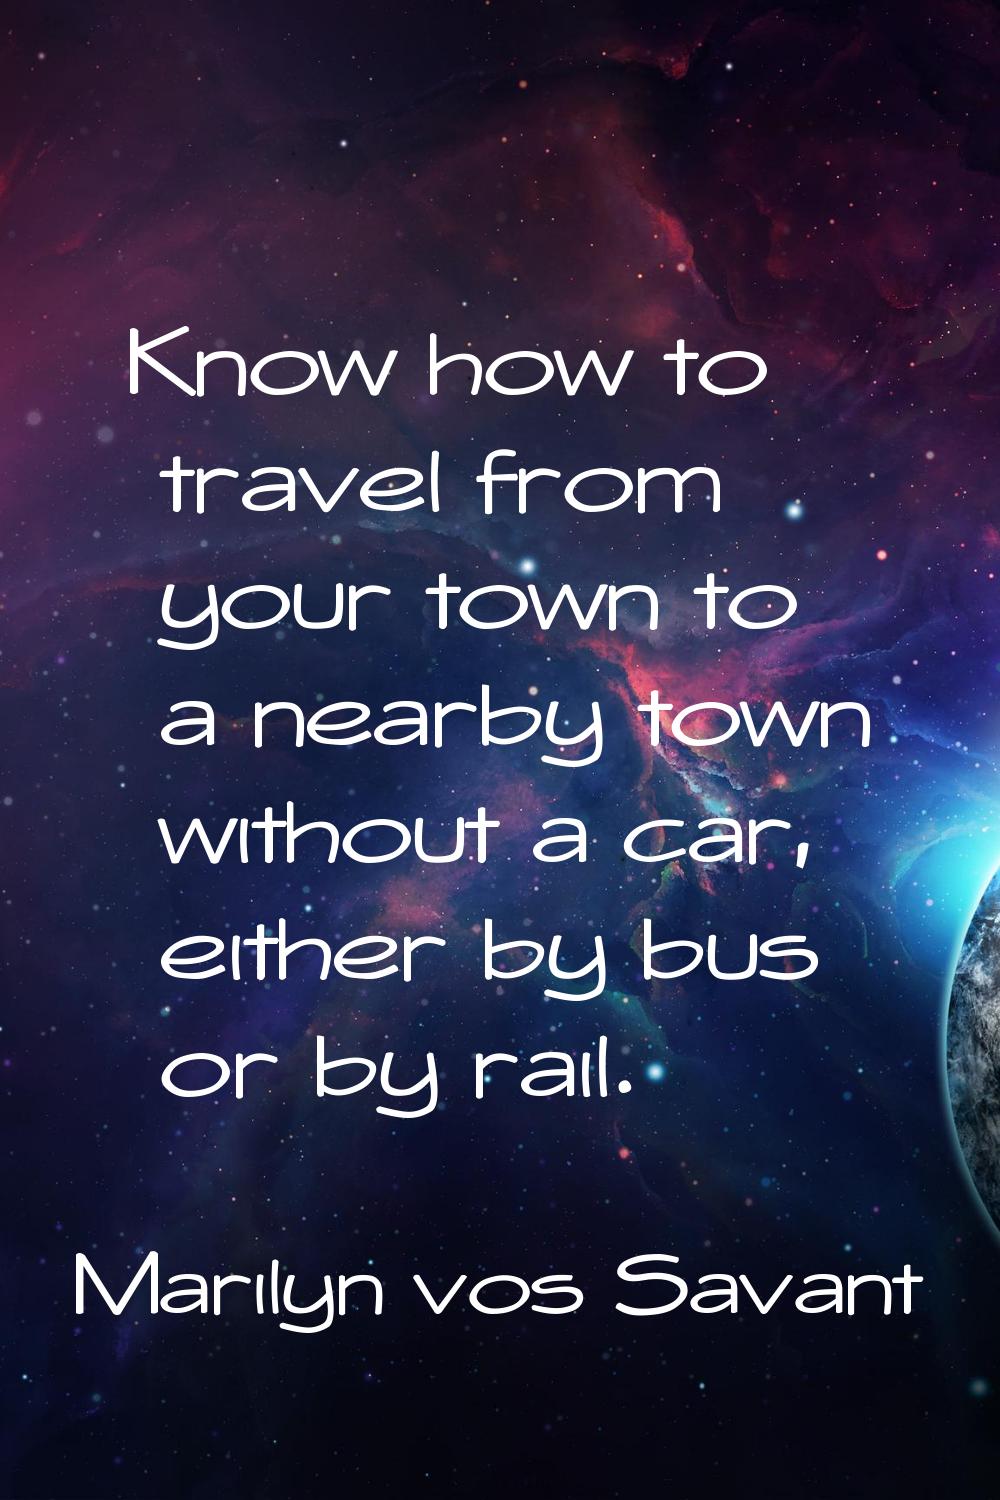 Know how to travel from your town to a nearby town without a car, either by bus or by rail.